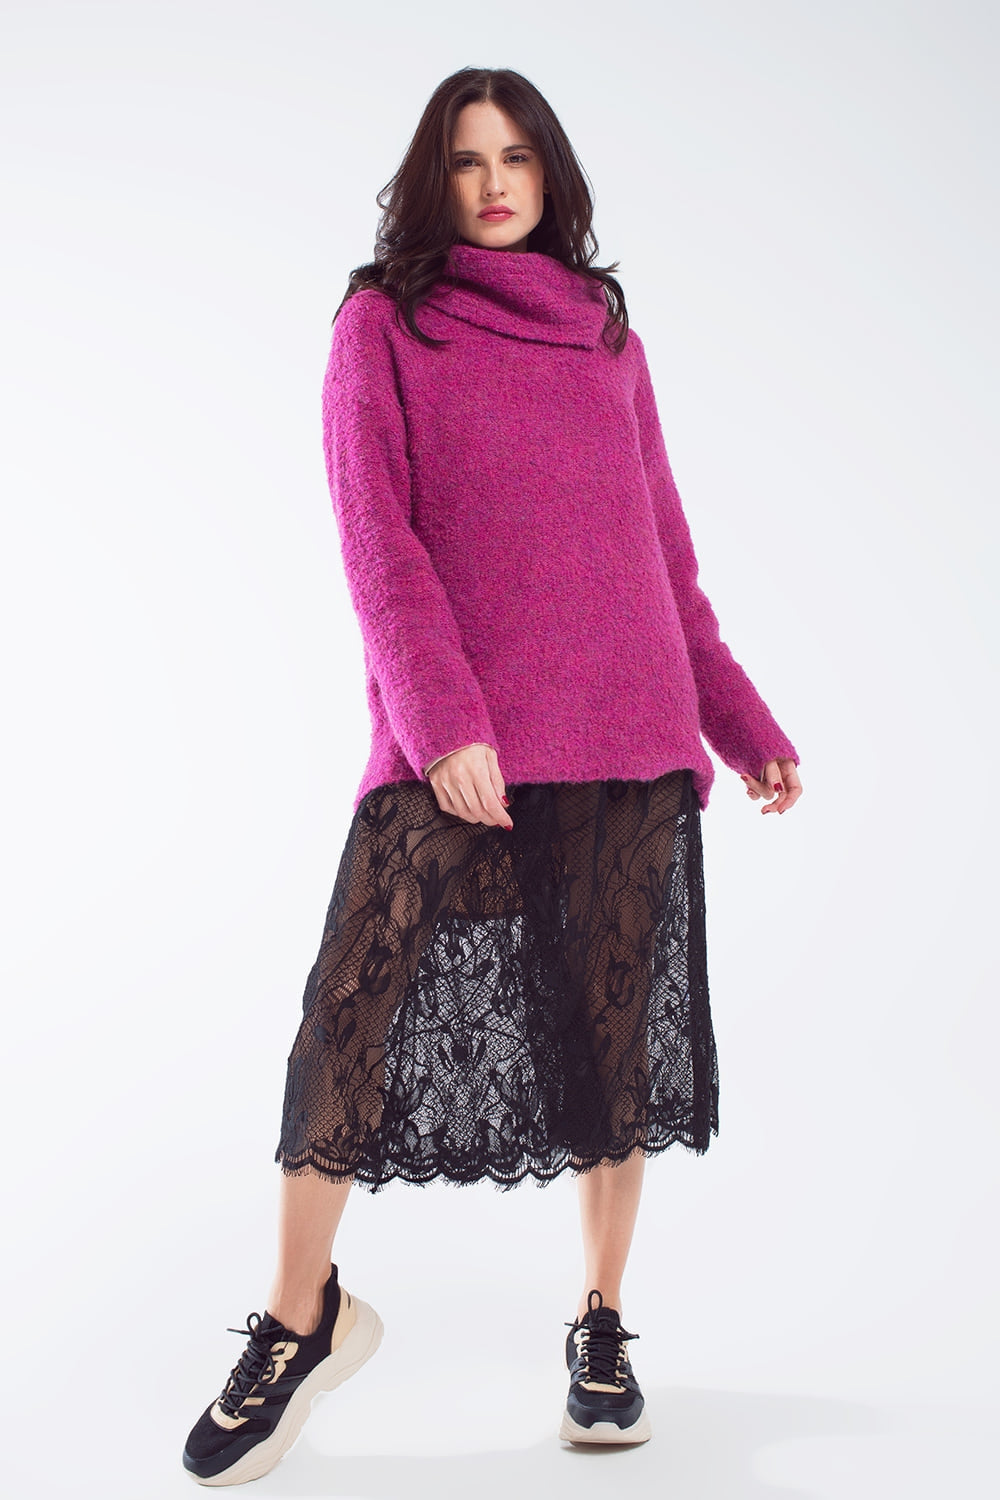 Q2 Wide sweater with bardot neck in magenta